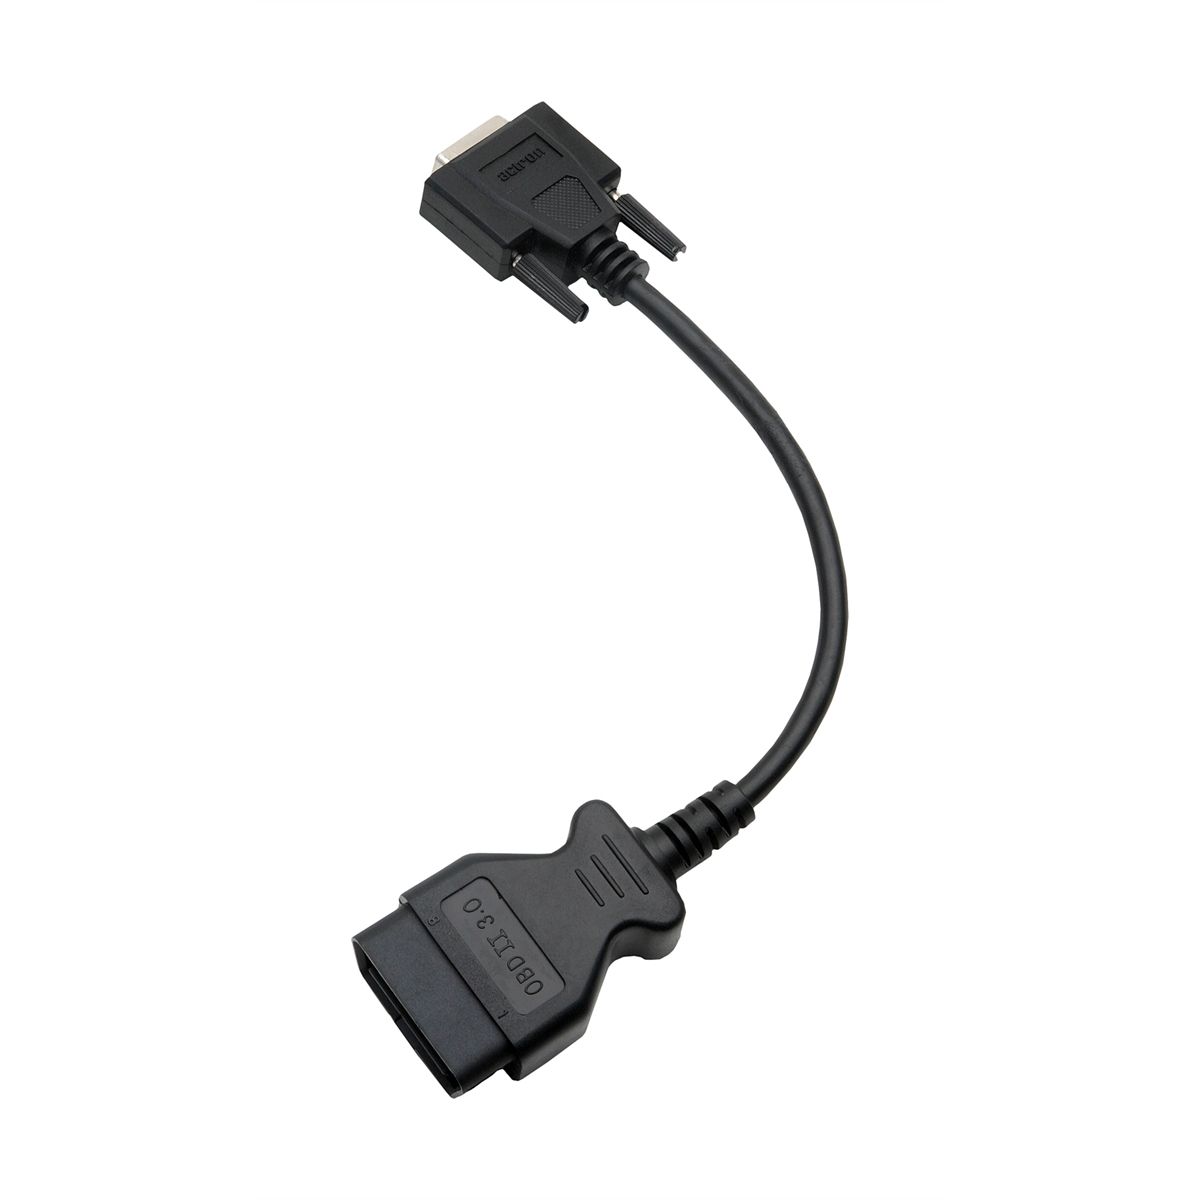 OBD II Replacement Cable for CP9145 and CP9150...